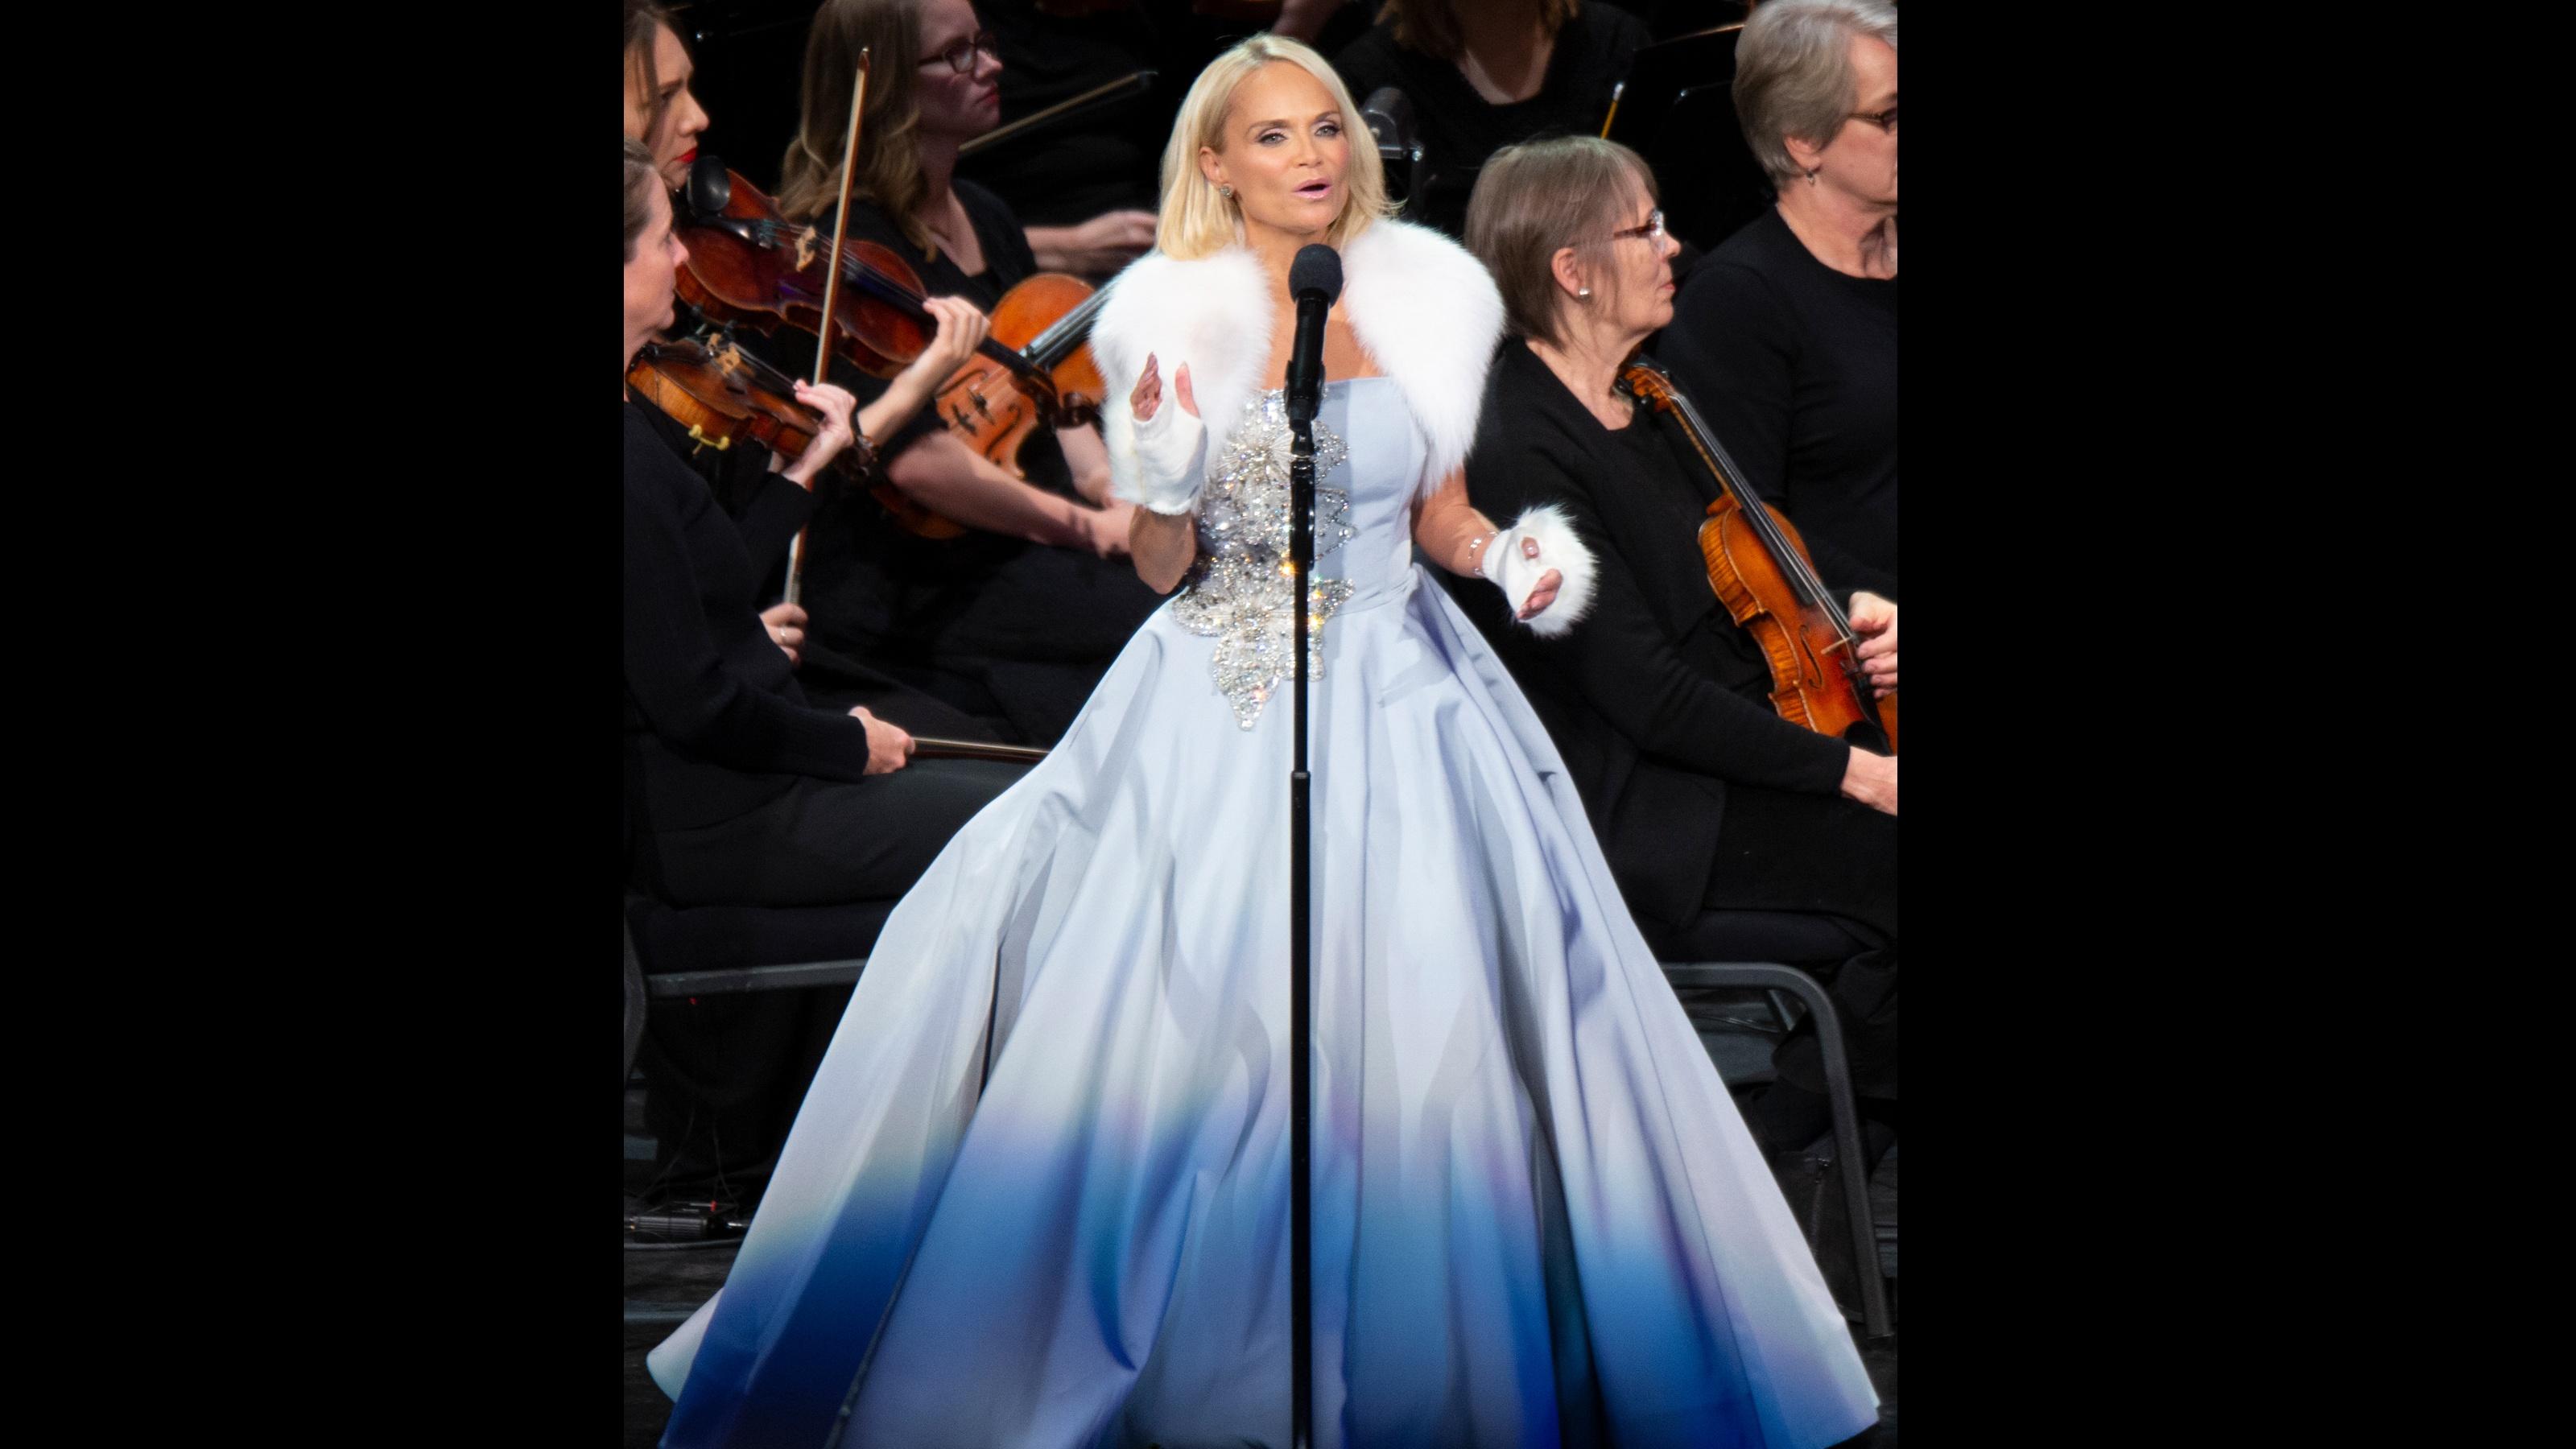 Kristin Chenoweth wears a pale blue dress with fur accents and sings in front of the violinists of The Orchestra at Temple Square.